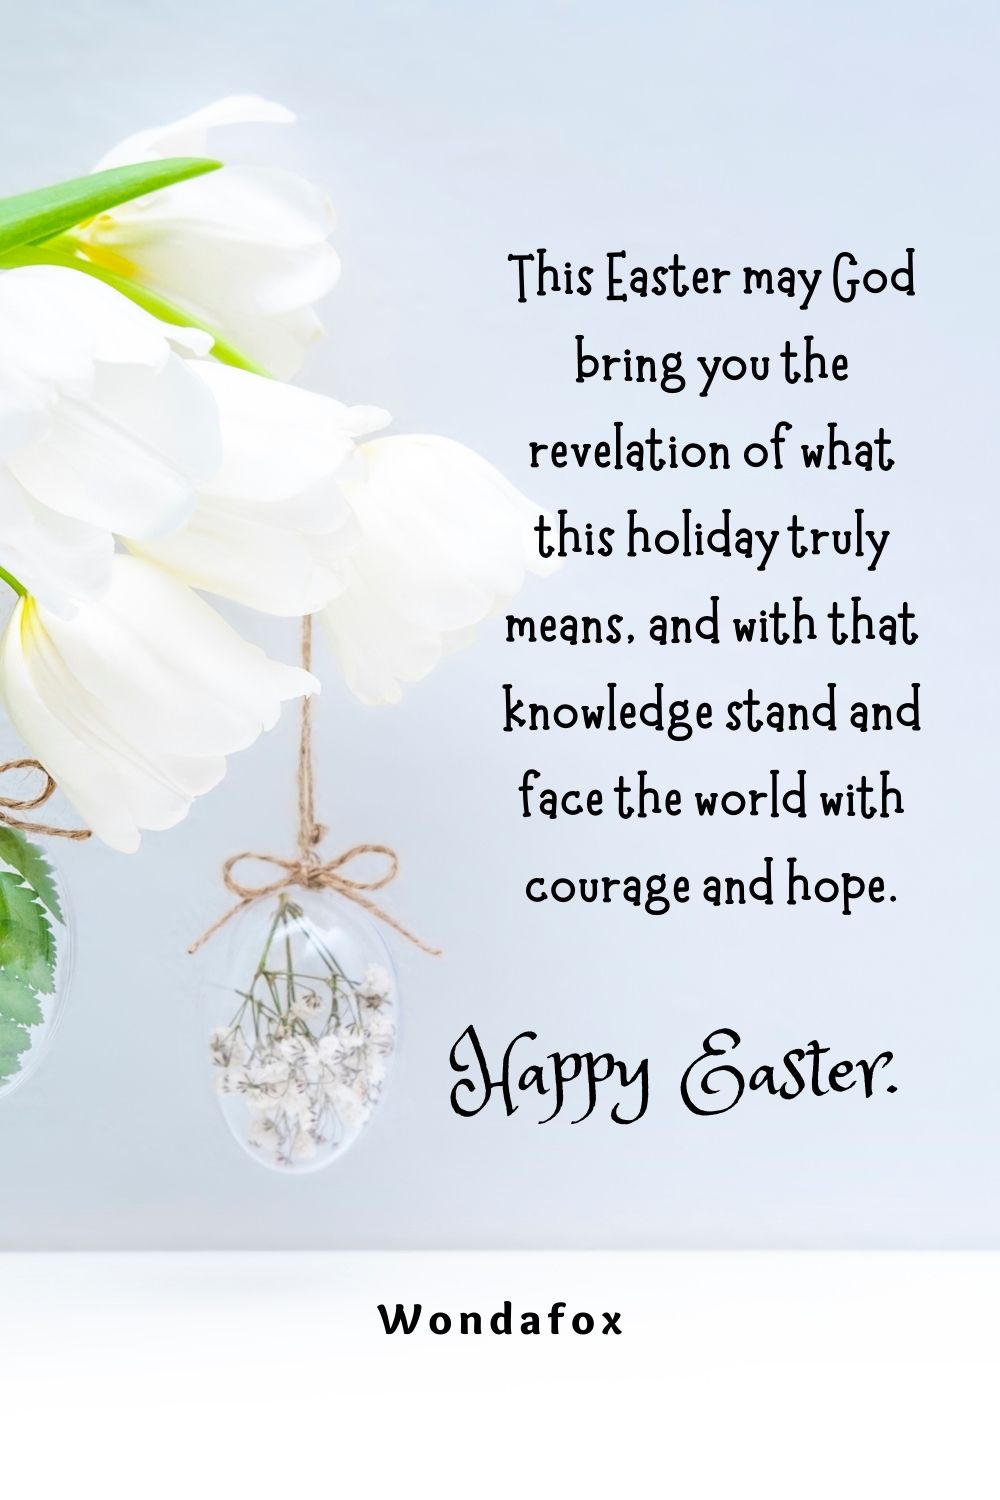 This Easter may God bring you the revelation of what this holiday truly means, and with that knowledge stand and face the world with courage and hope. Happy Easter.